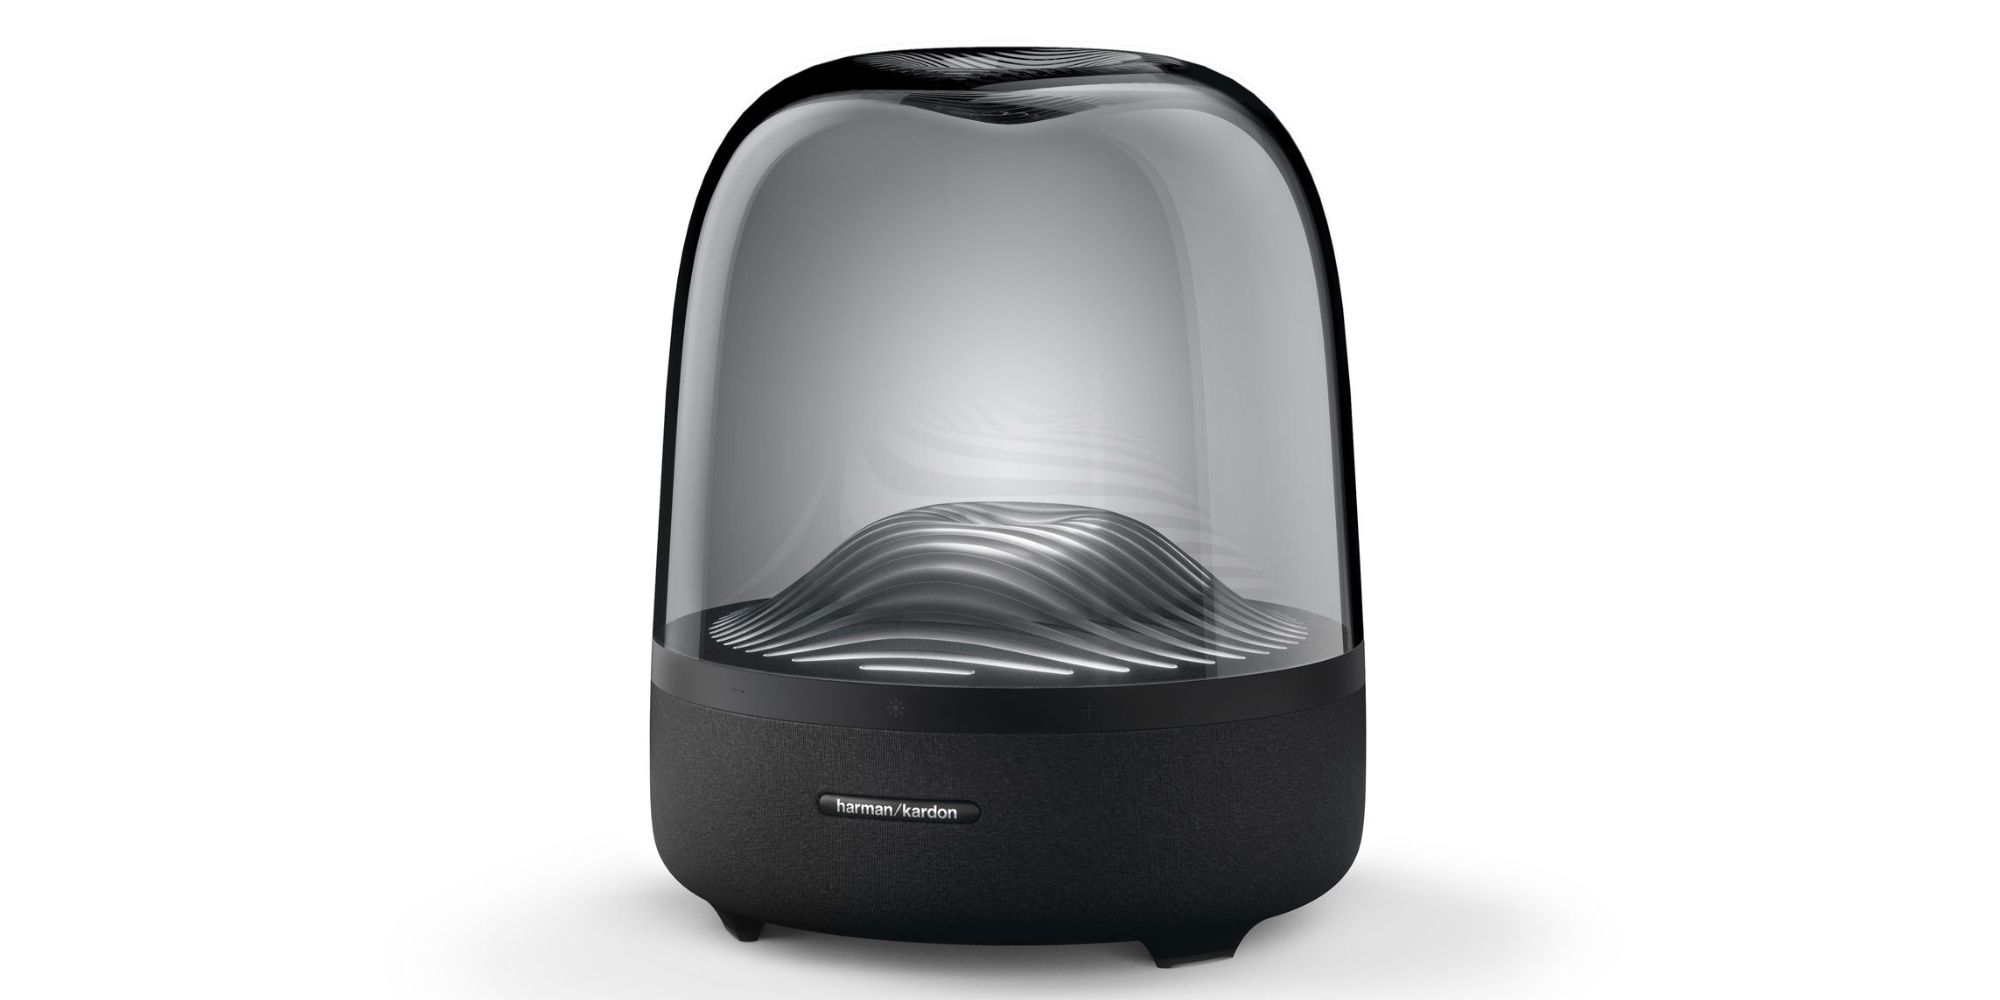 Aura Studio 3 from Harman Kardon goes up for pre-order - 9to5Toys